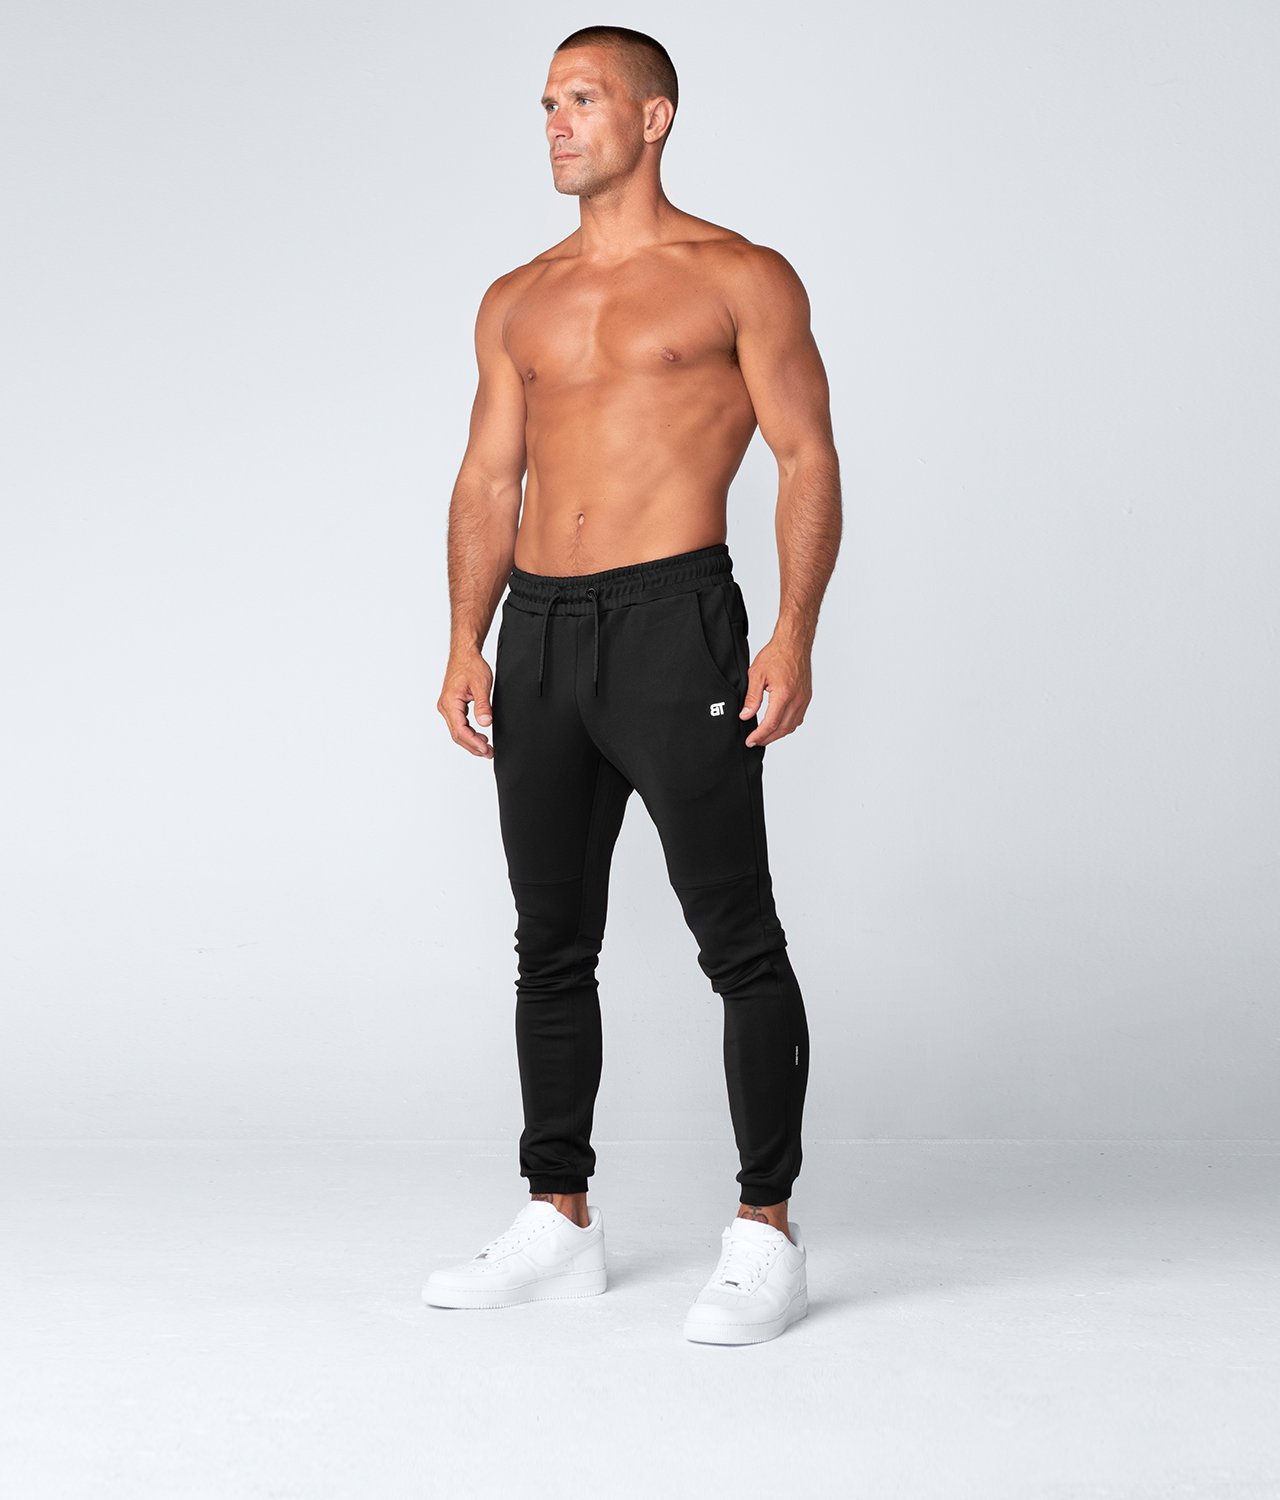 Men's Workout Pants, Joggers & Sweatpants - Fitted Fit in Black